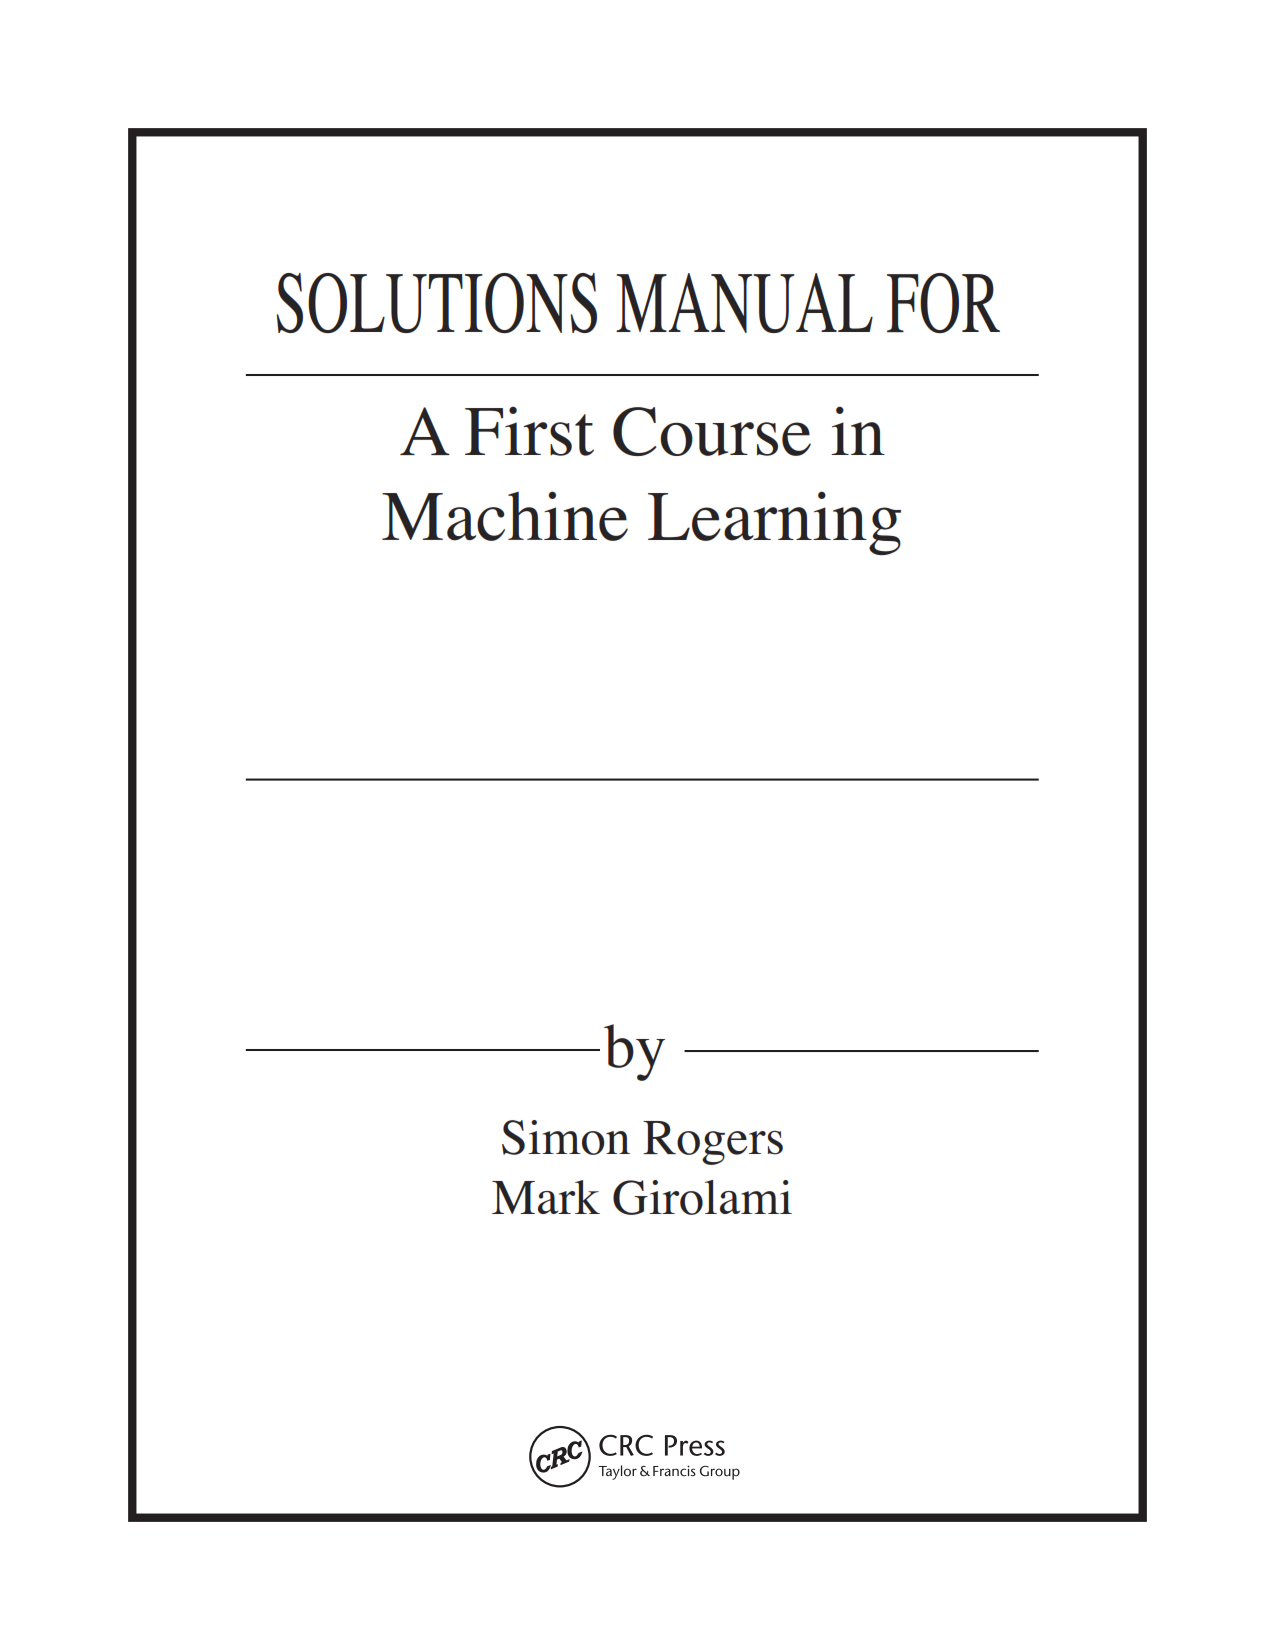 Solution Manual and answer of a first course in machine learning 1st edition written by Simon Rogers Mark Girolami eBook pdf